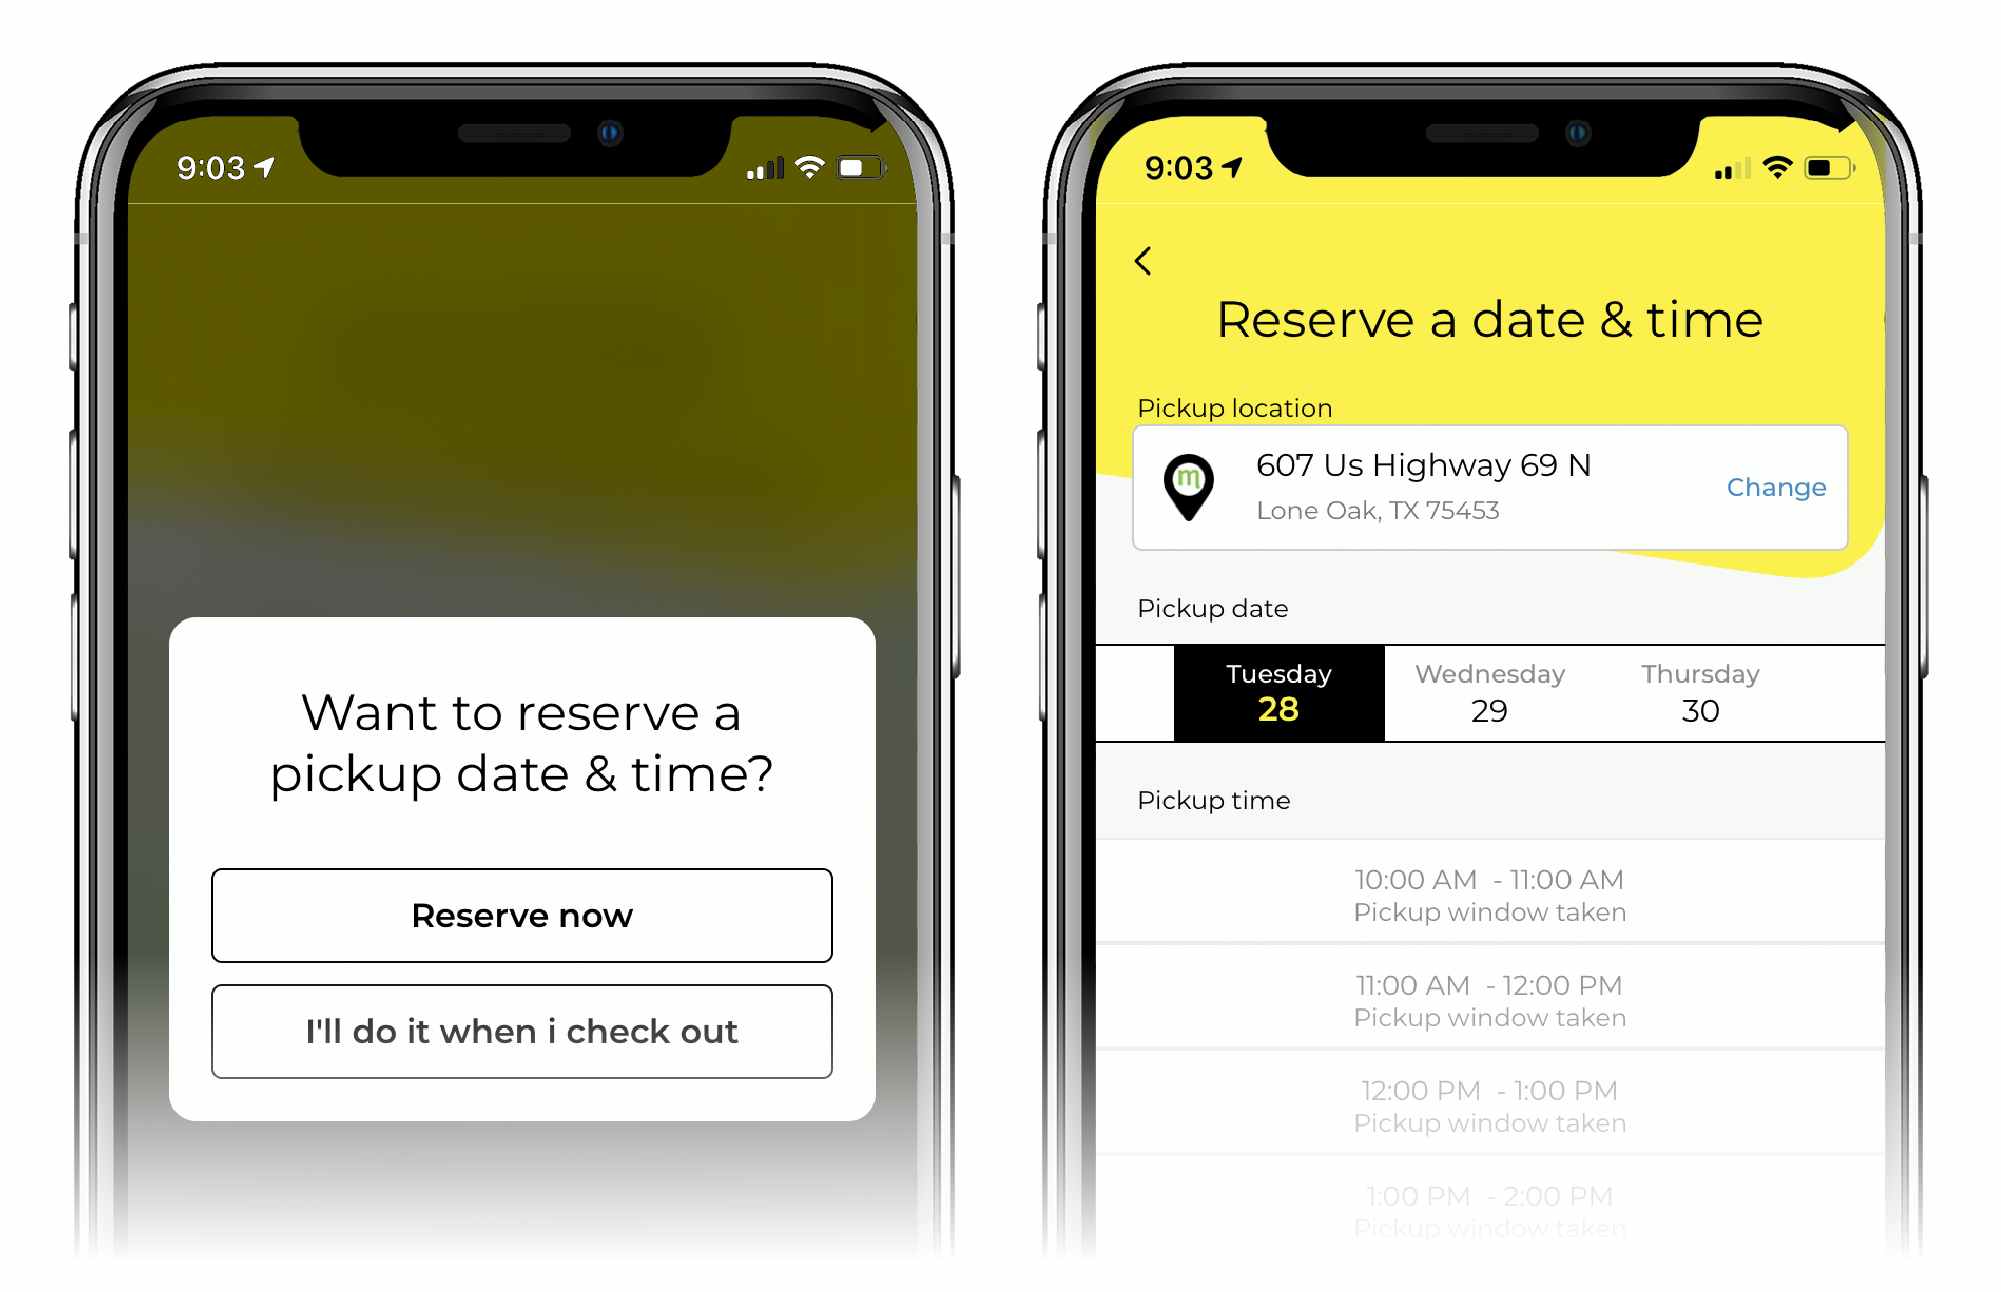 phone screen asks if user wants to reserve pickup time and gives options